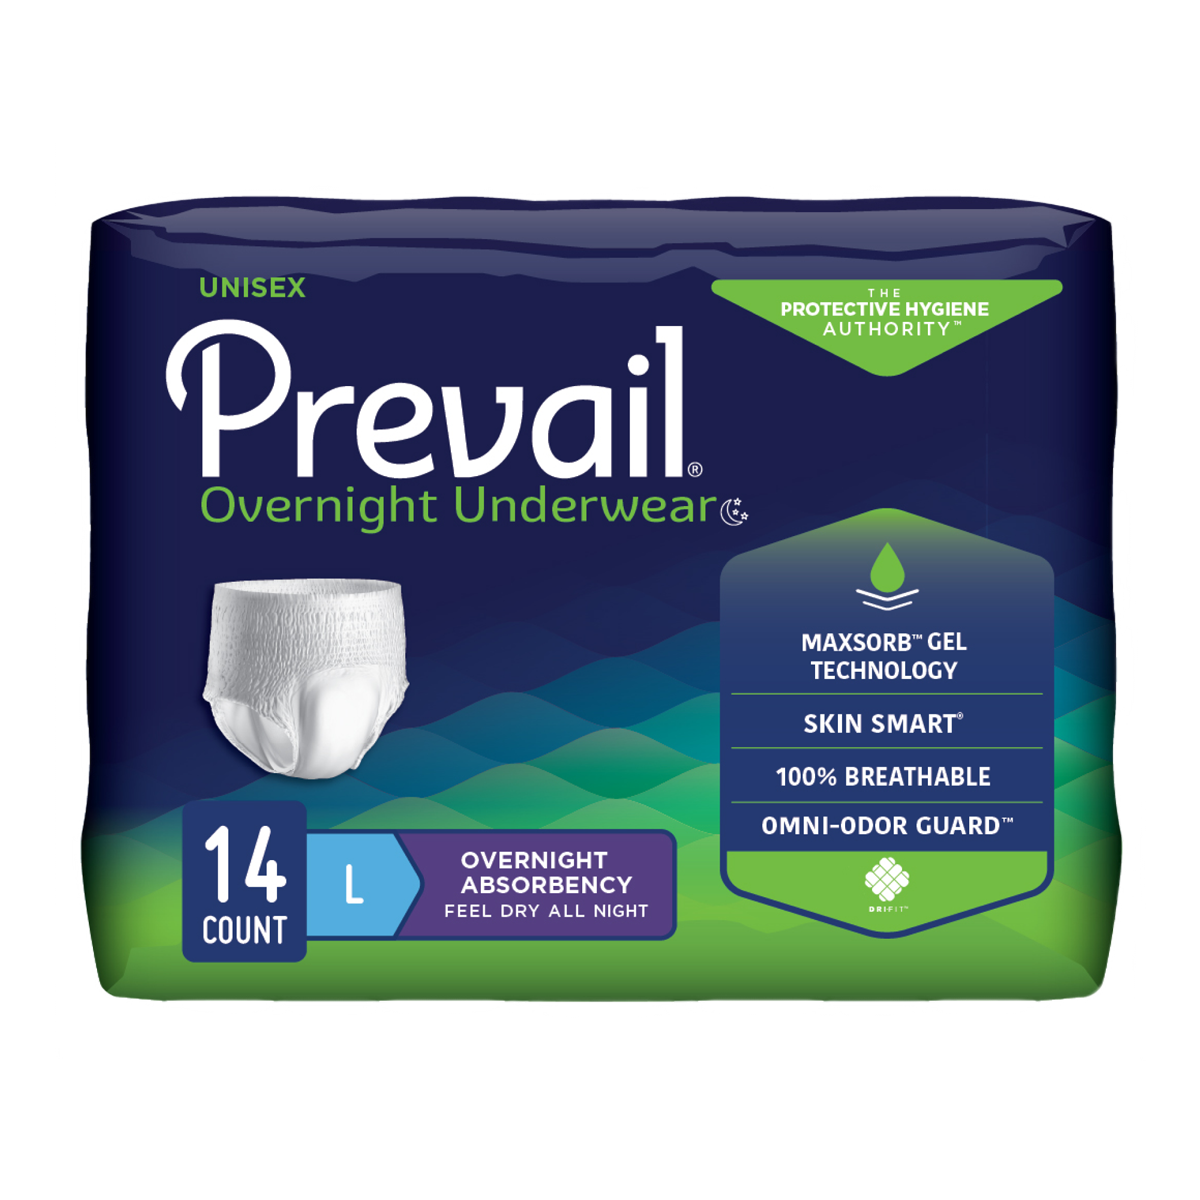 Prevail overnight underwear for men and women